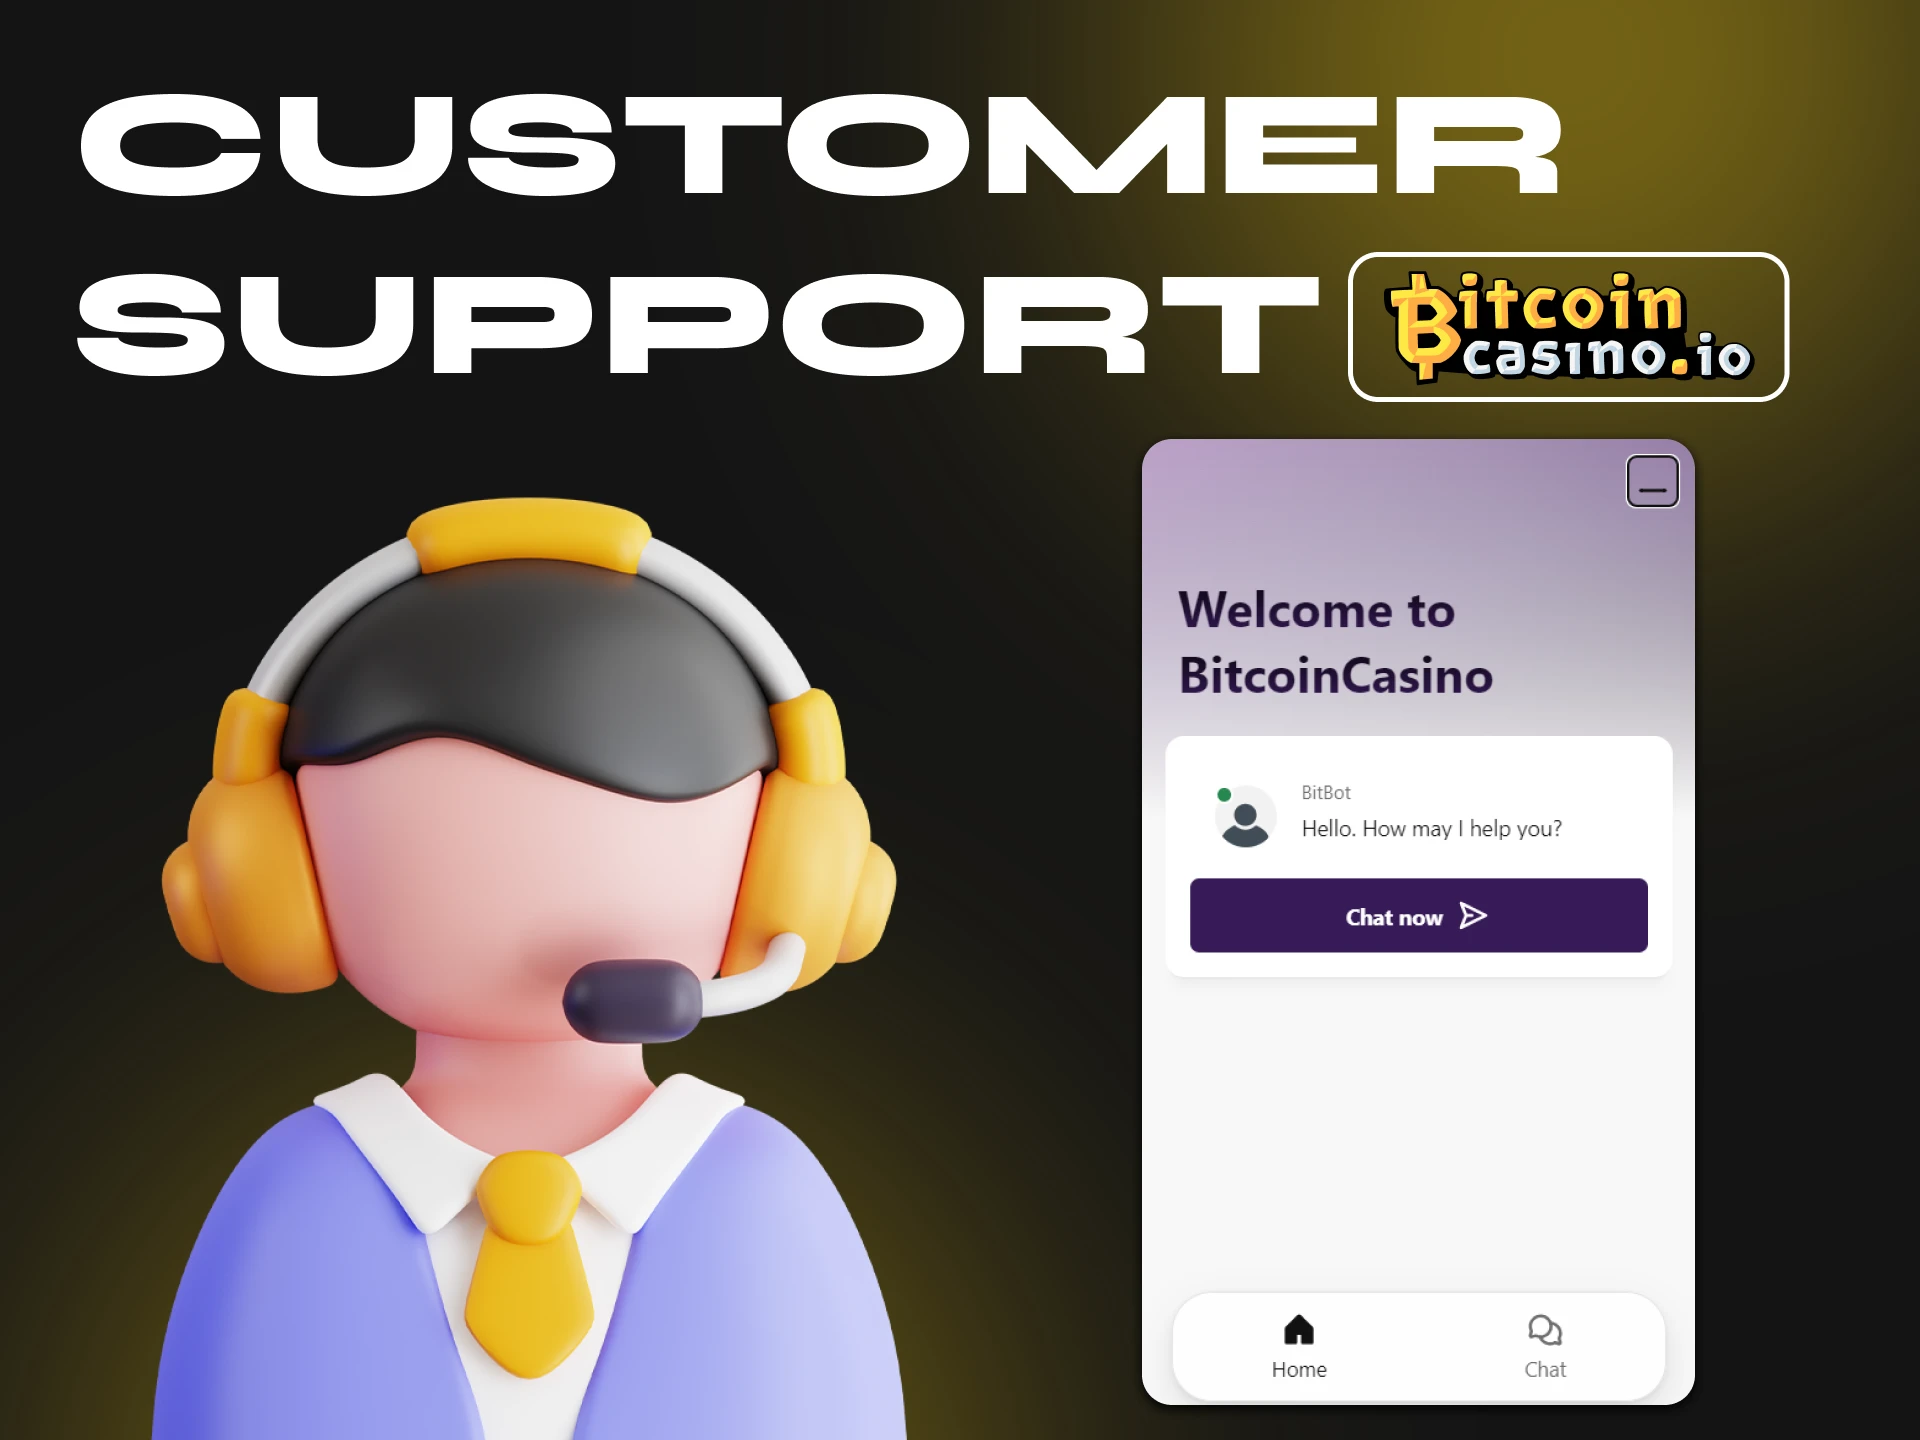 Contact Bitcoincasino support if you have any difficulties with the site.